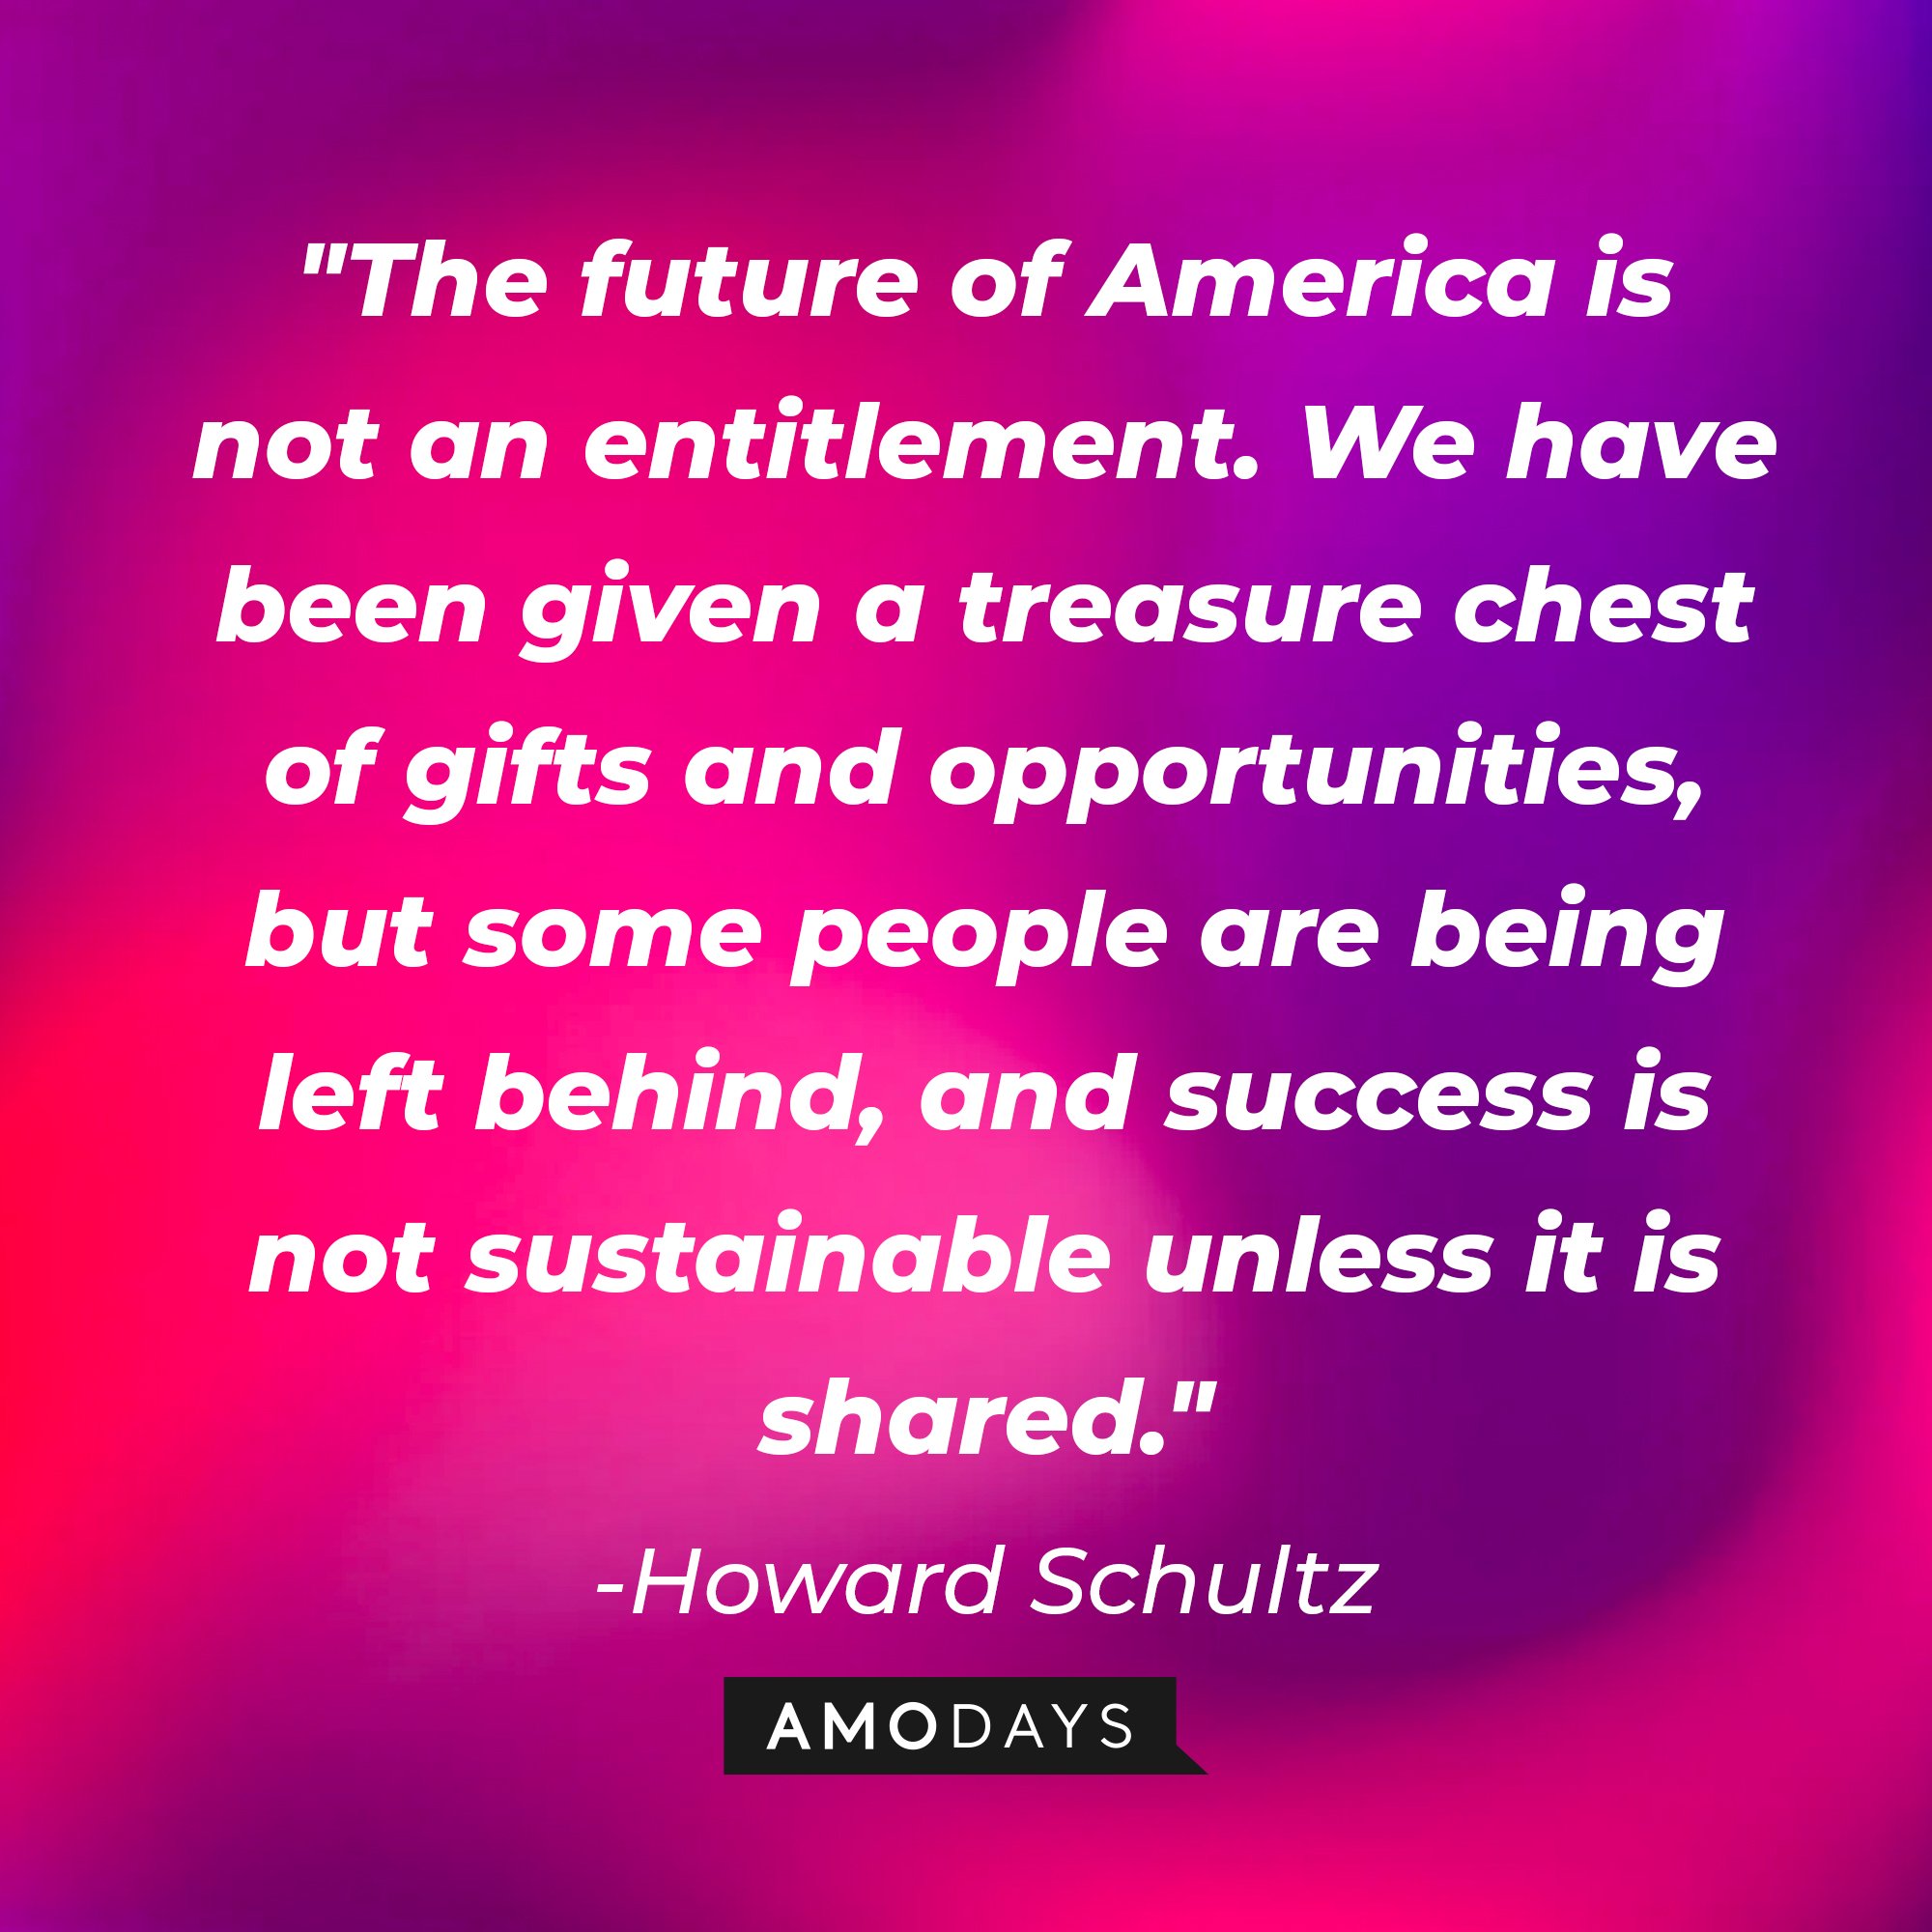 Howard Schultz’s quote: "The future of America is not an entitlement. We have been given a treasure chest of gifts and opportunities, but some people are being left behind, and success is not sustainable unless it is shared." | Image: AmoDays